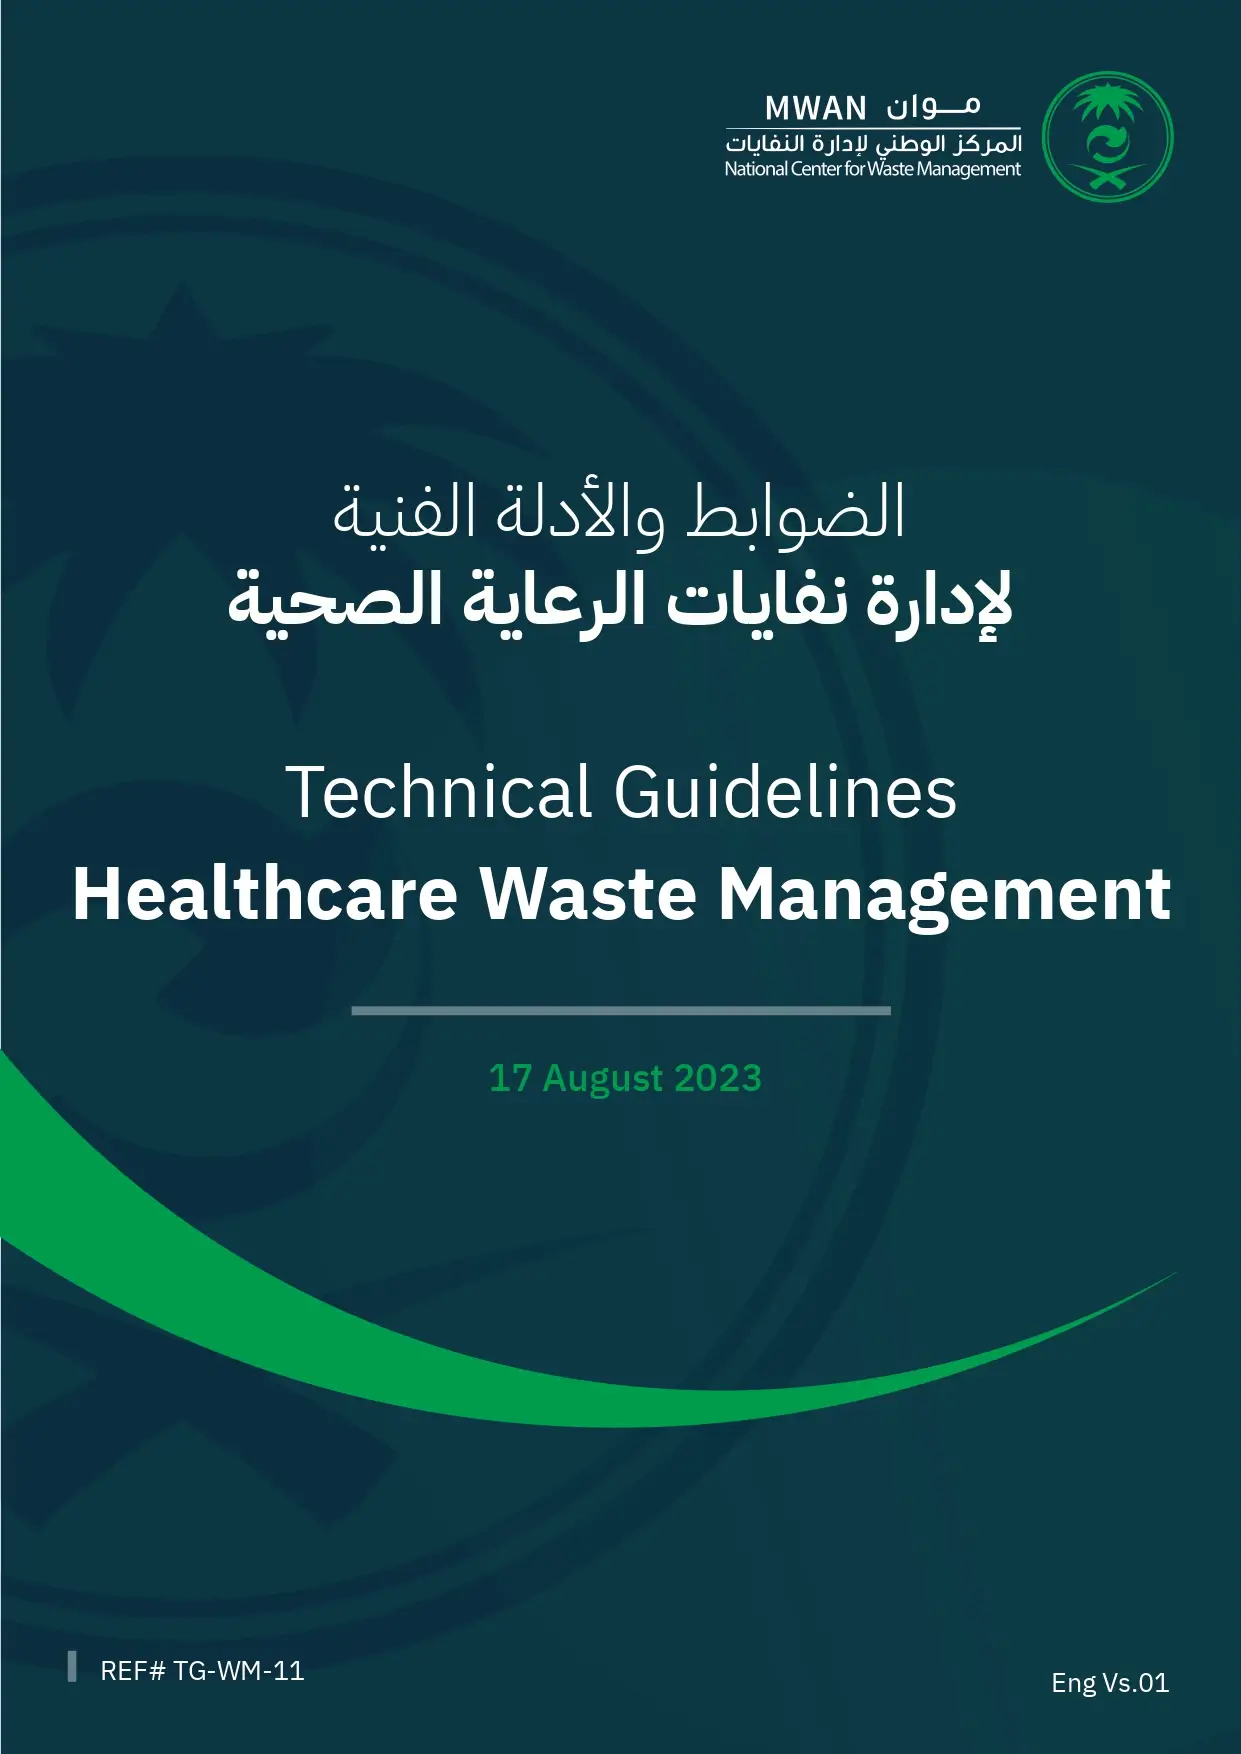 Technical Guidelines- Healthcare Waste Management